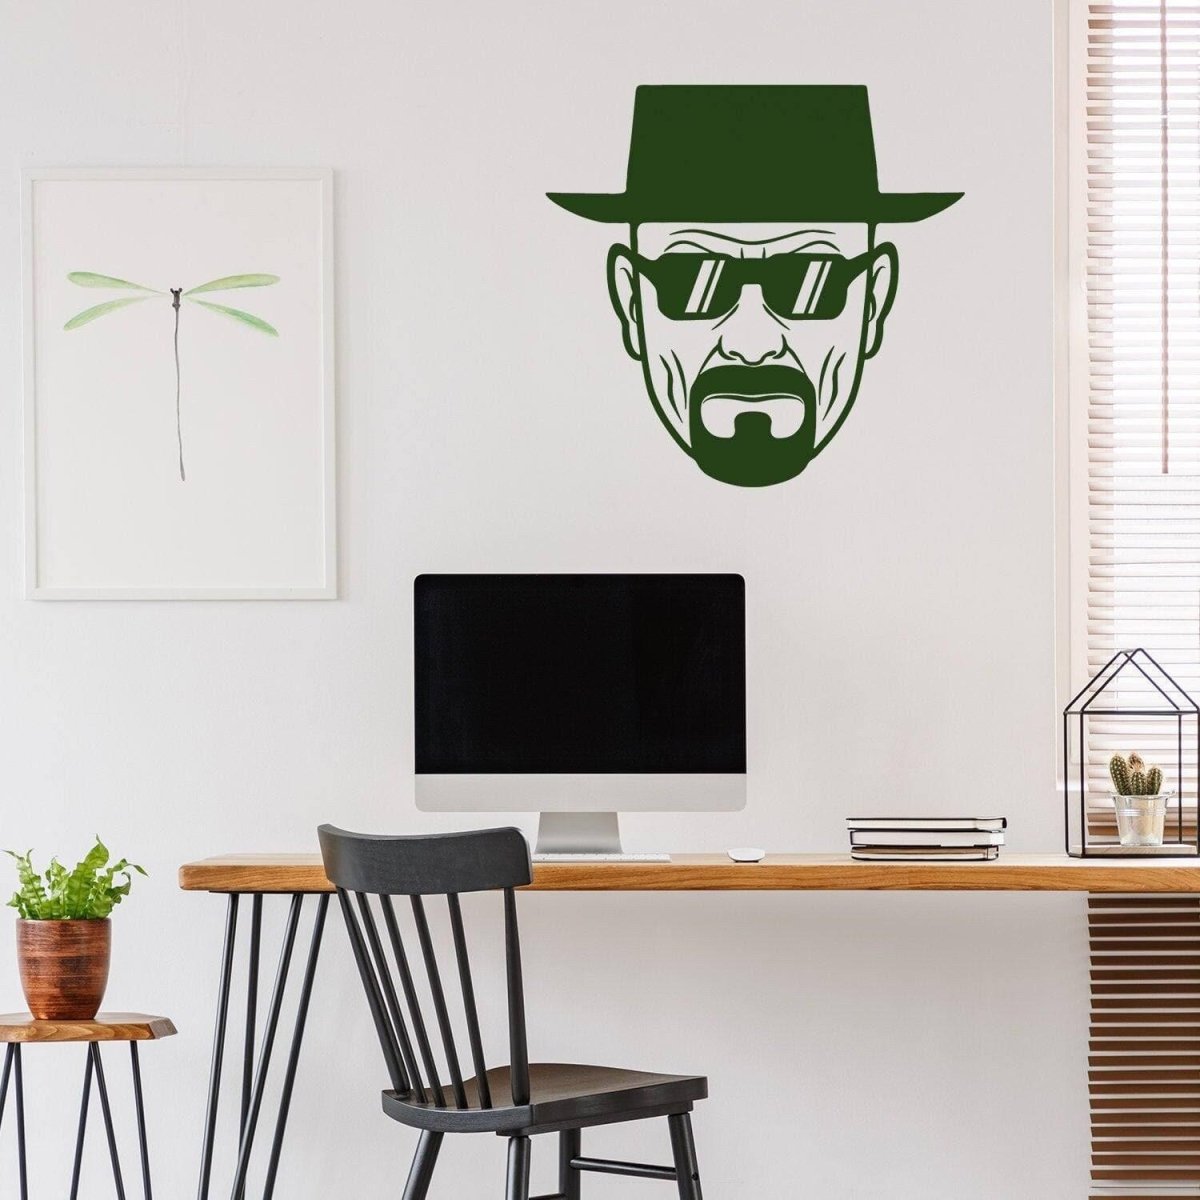 Eisenberg Breaking Bad Vinyl Sticker - Unique and Humorous Wall Decal - Decords